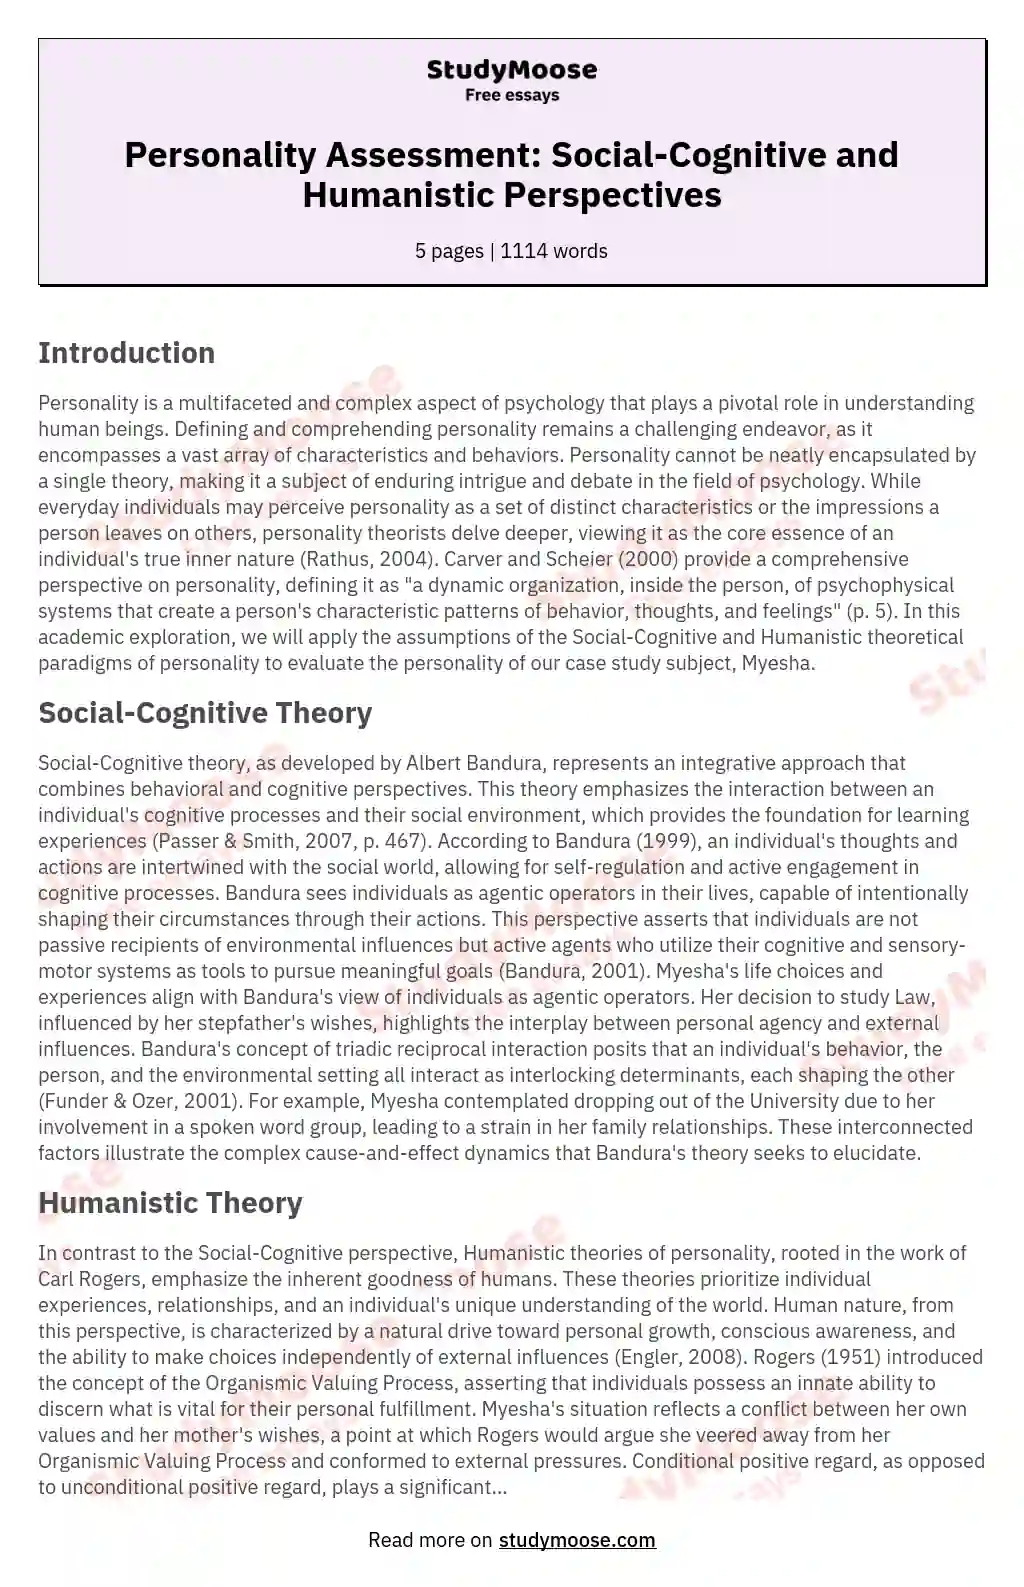 Personality Assessment: Social-Cognitive and Humanistic Perspectives essay